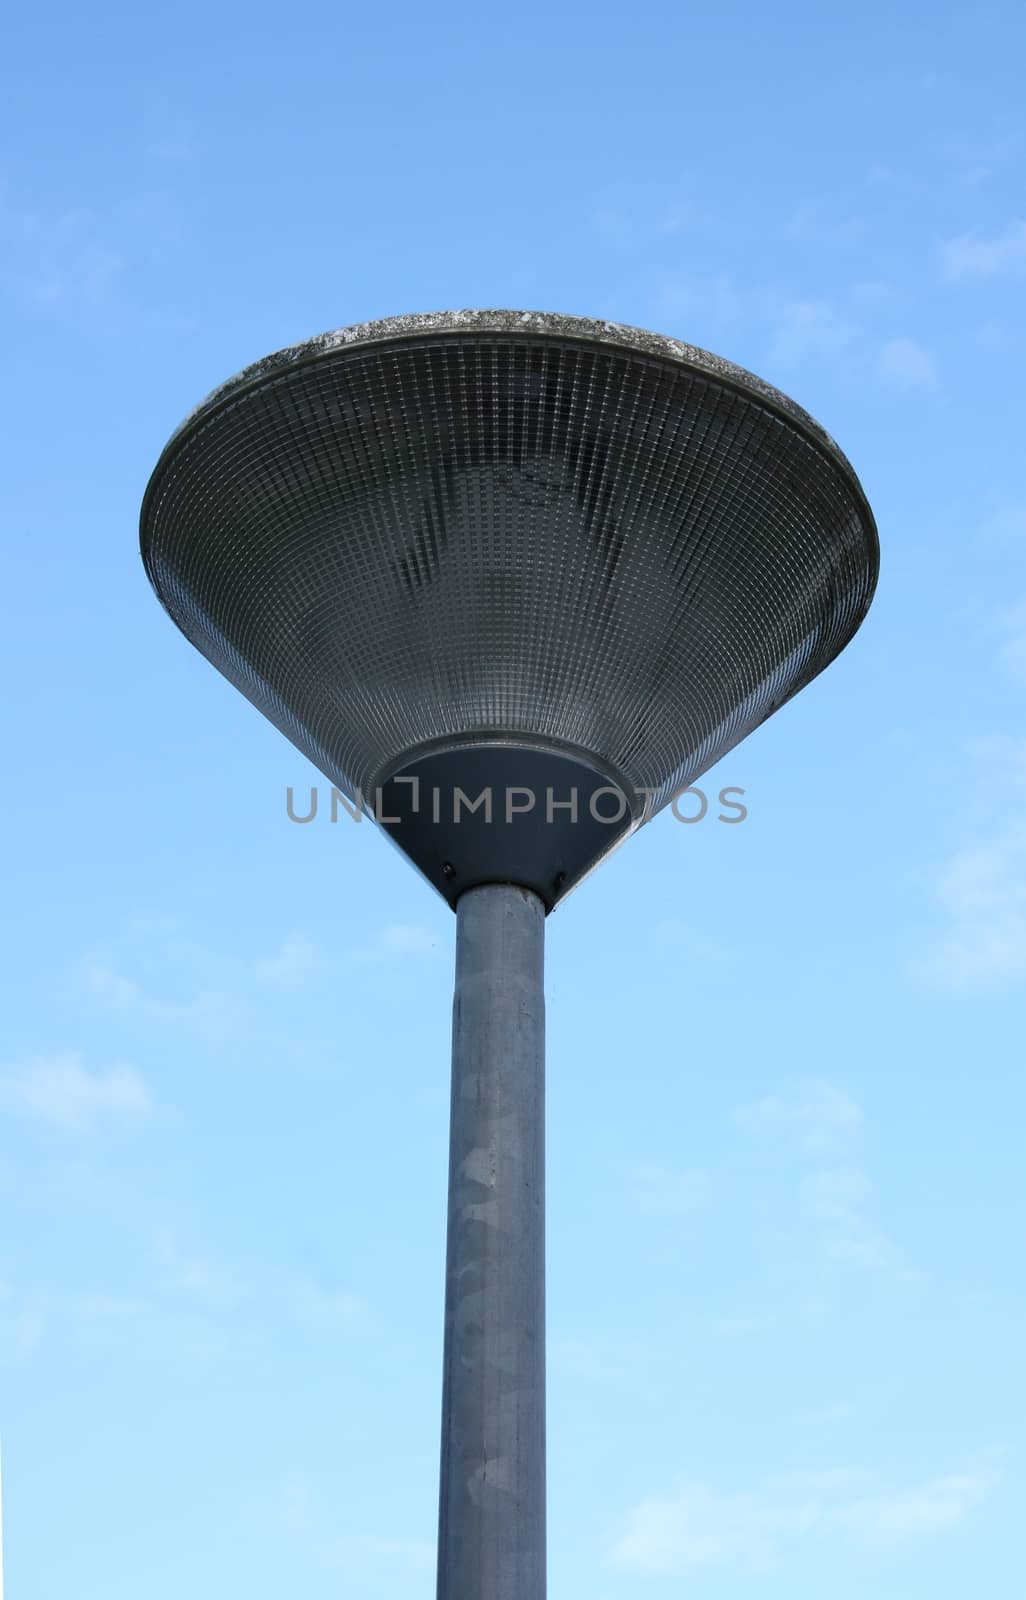 Street lamp with a large screen, blue sky in the background 